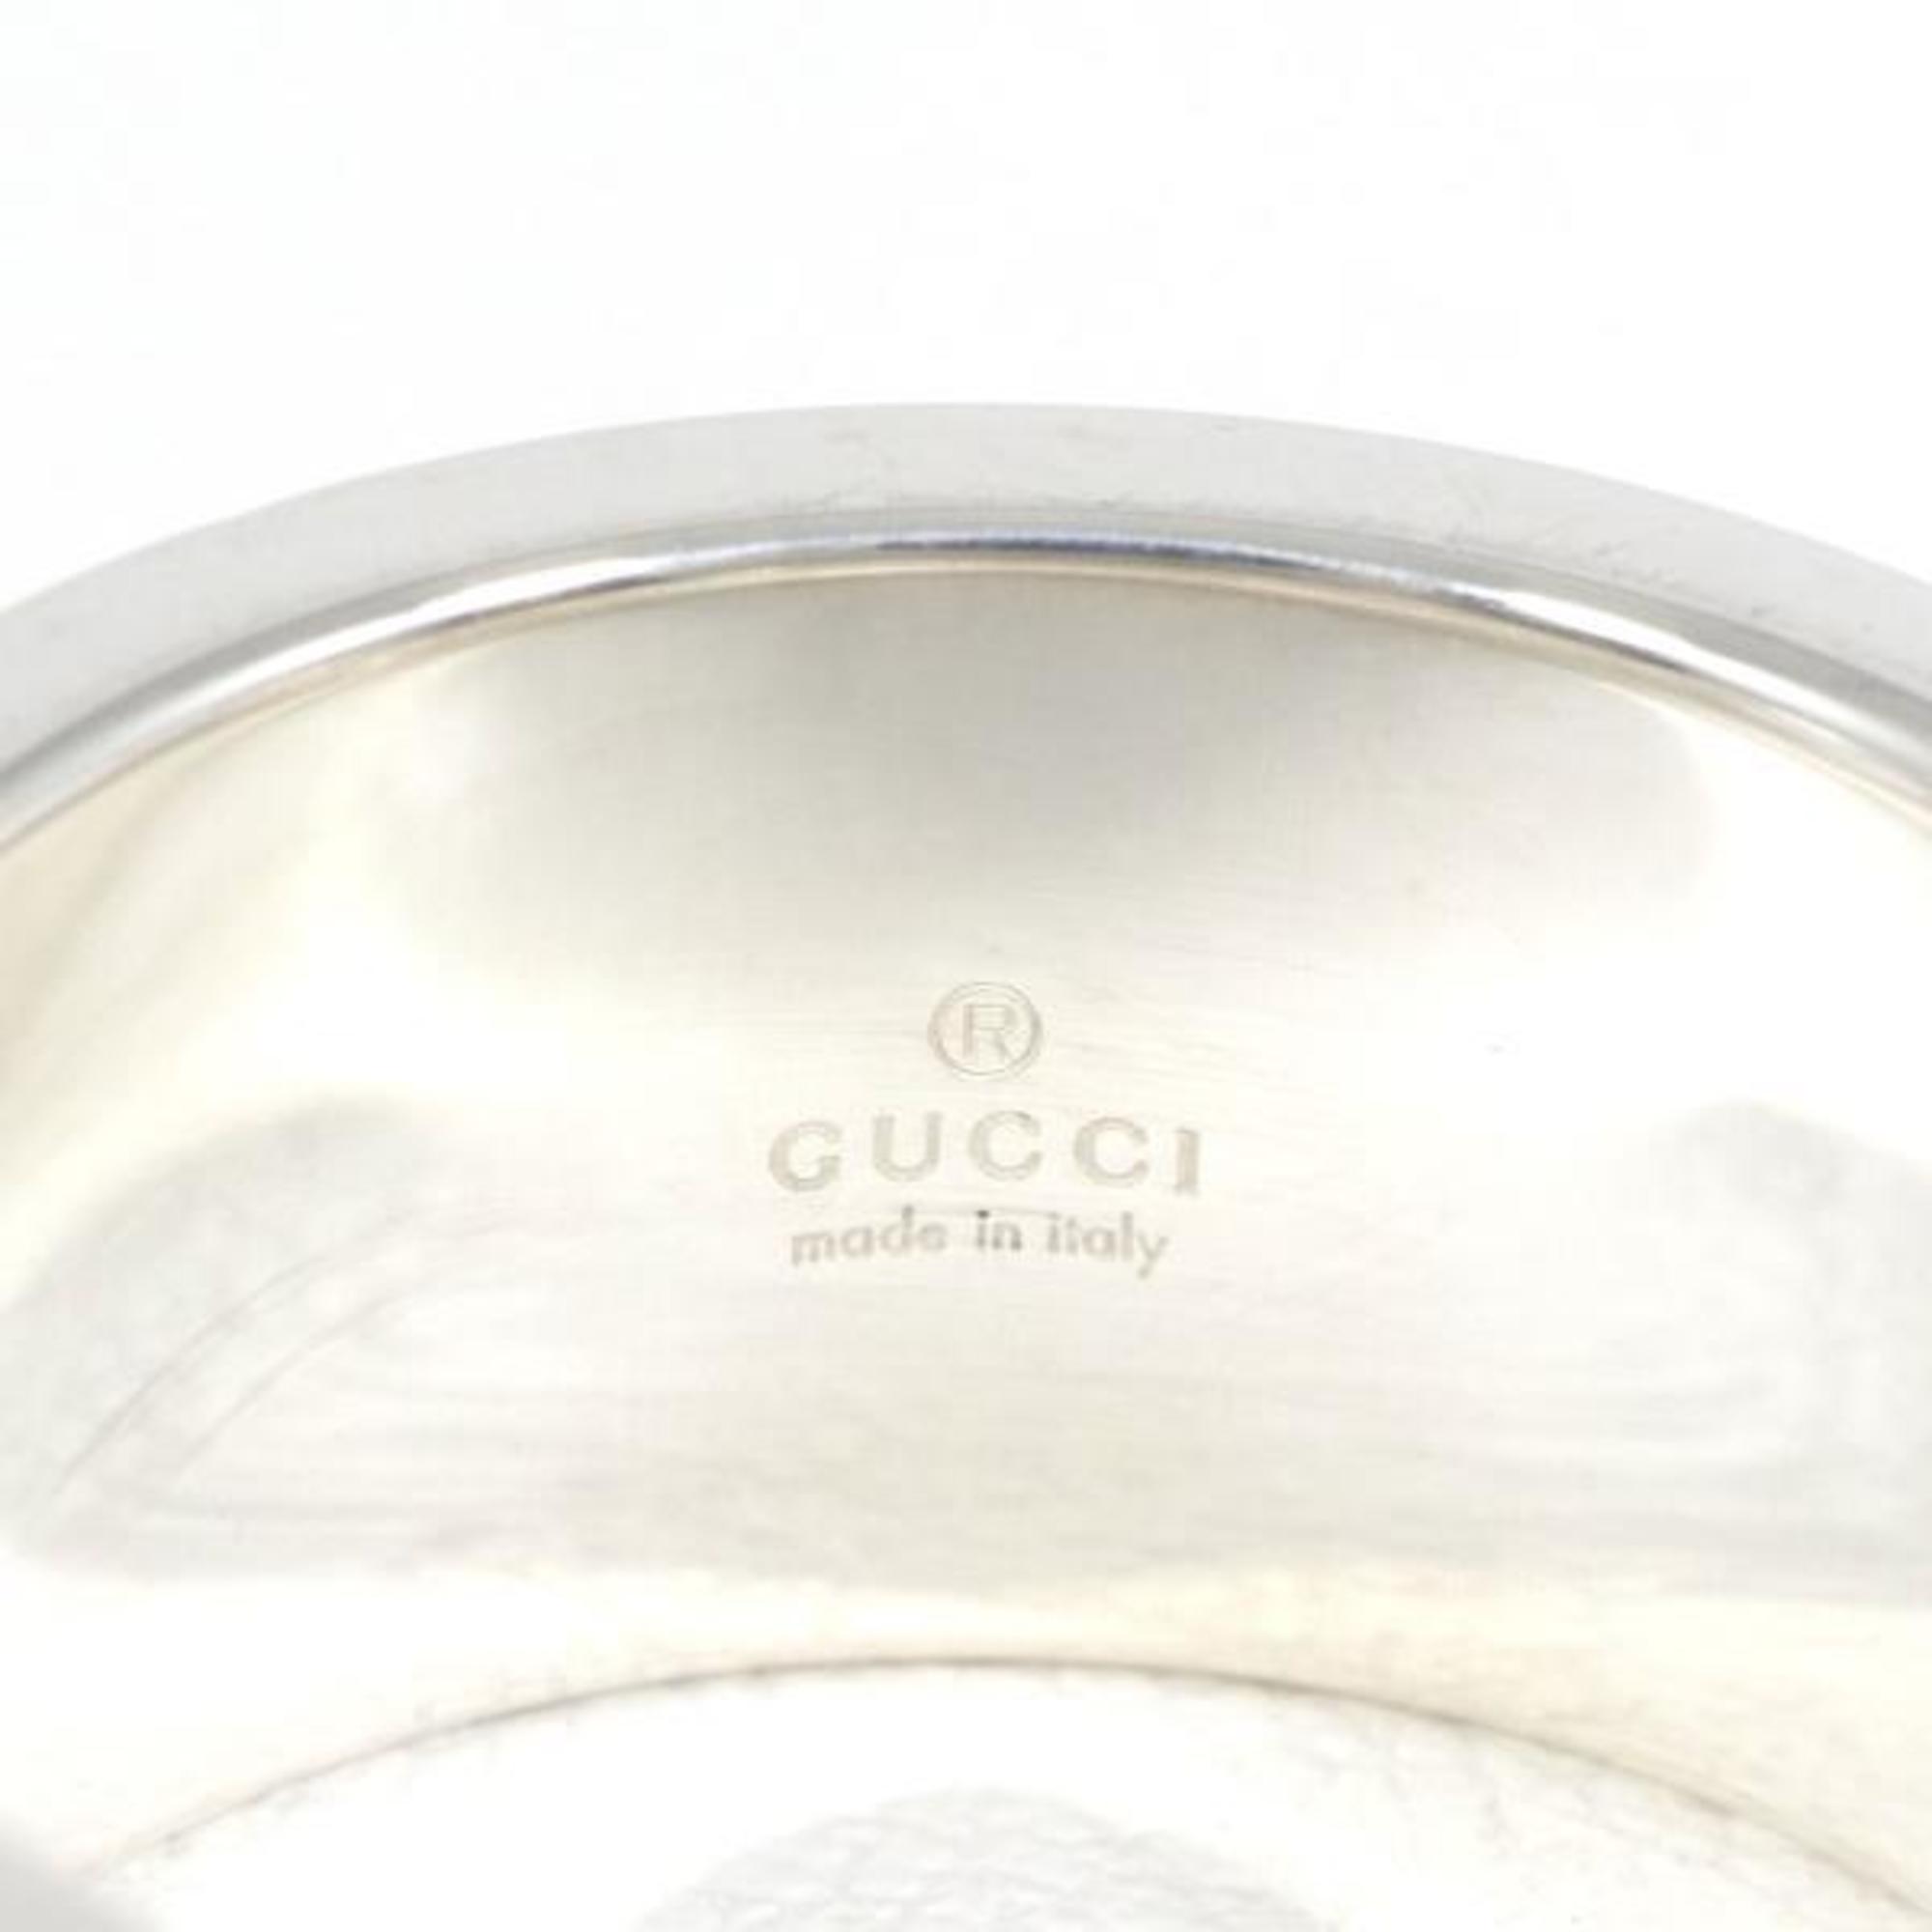 Gucci G logo silver ring size 14 gross weight about 10.8g jewelry